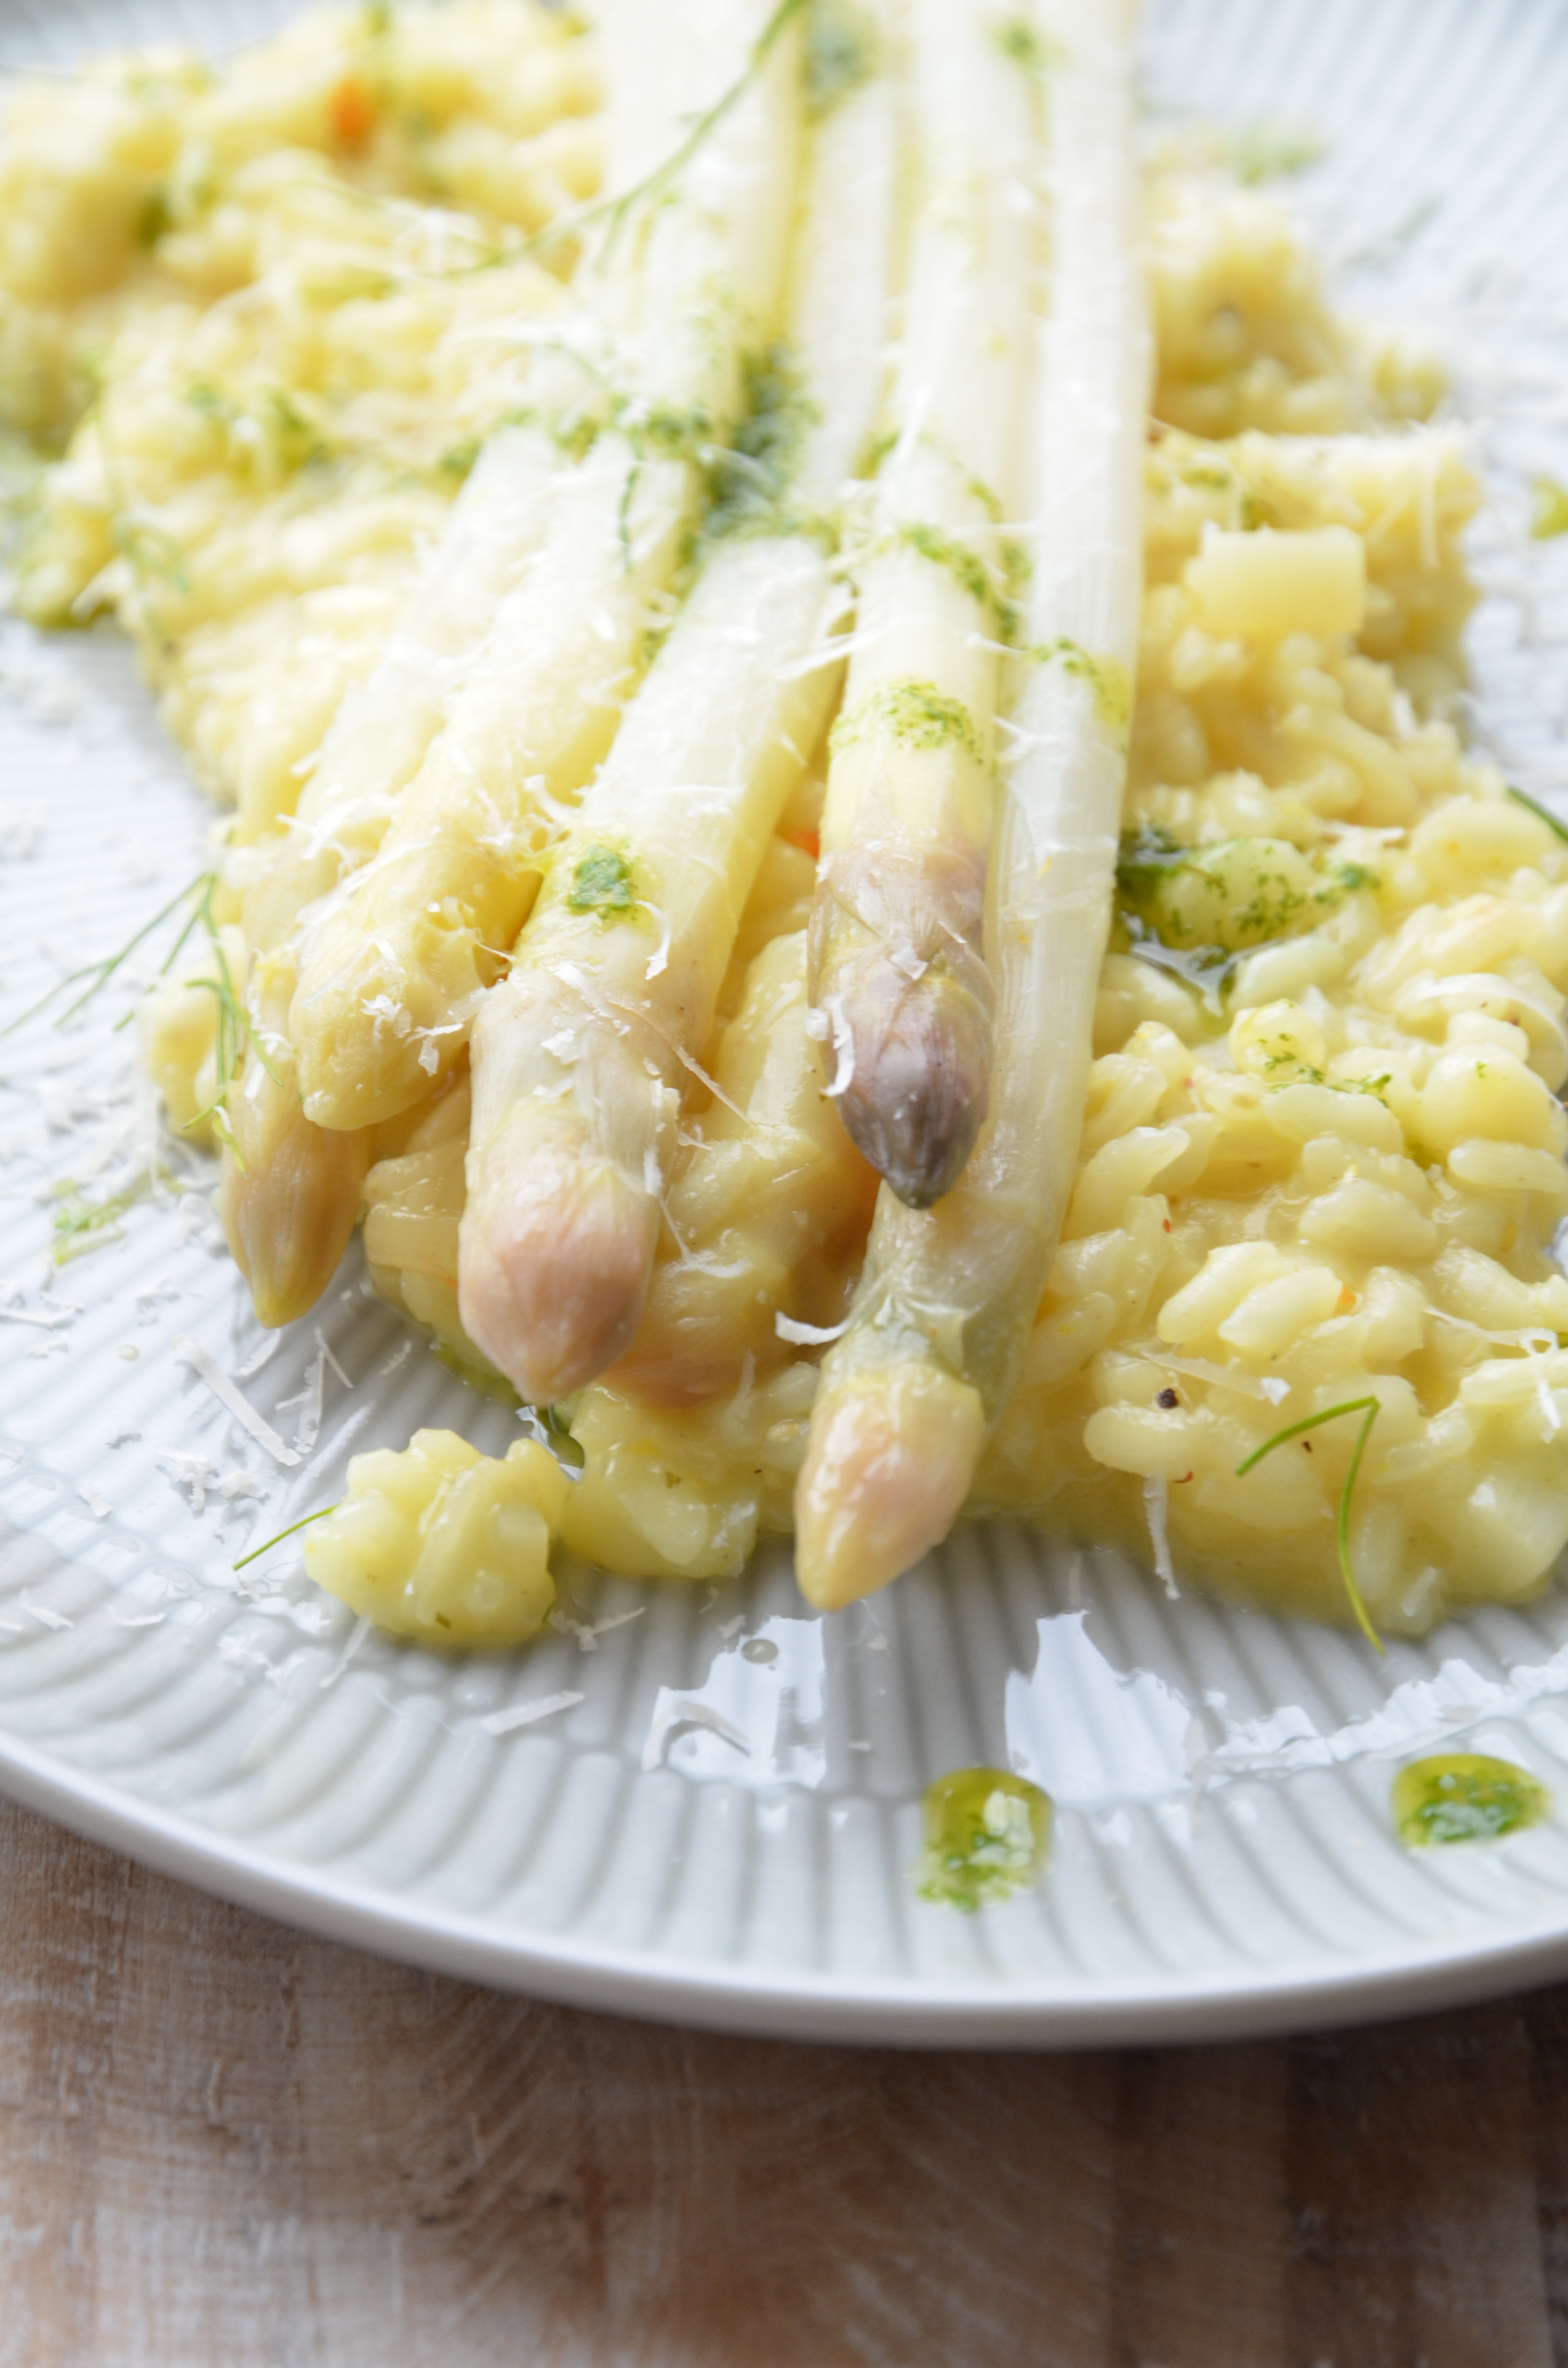 Zitronen-Spargel-Risotto | cookthebooth